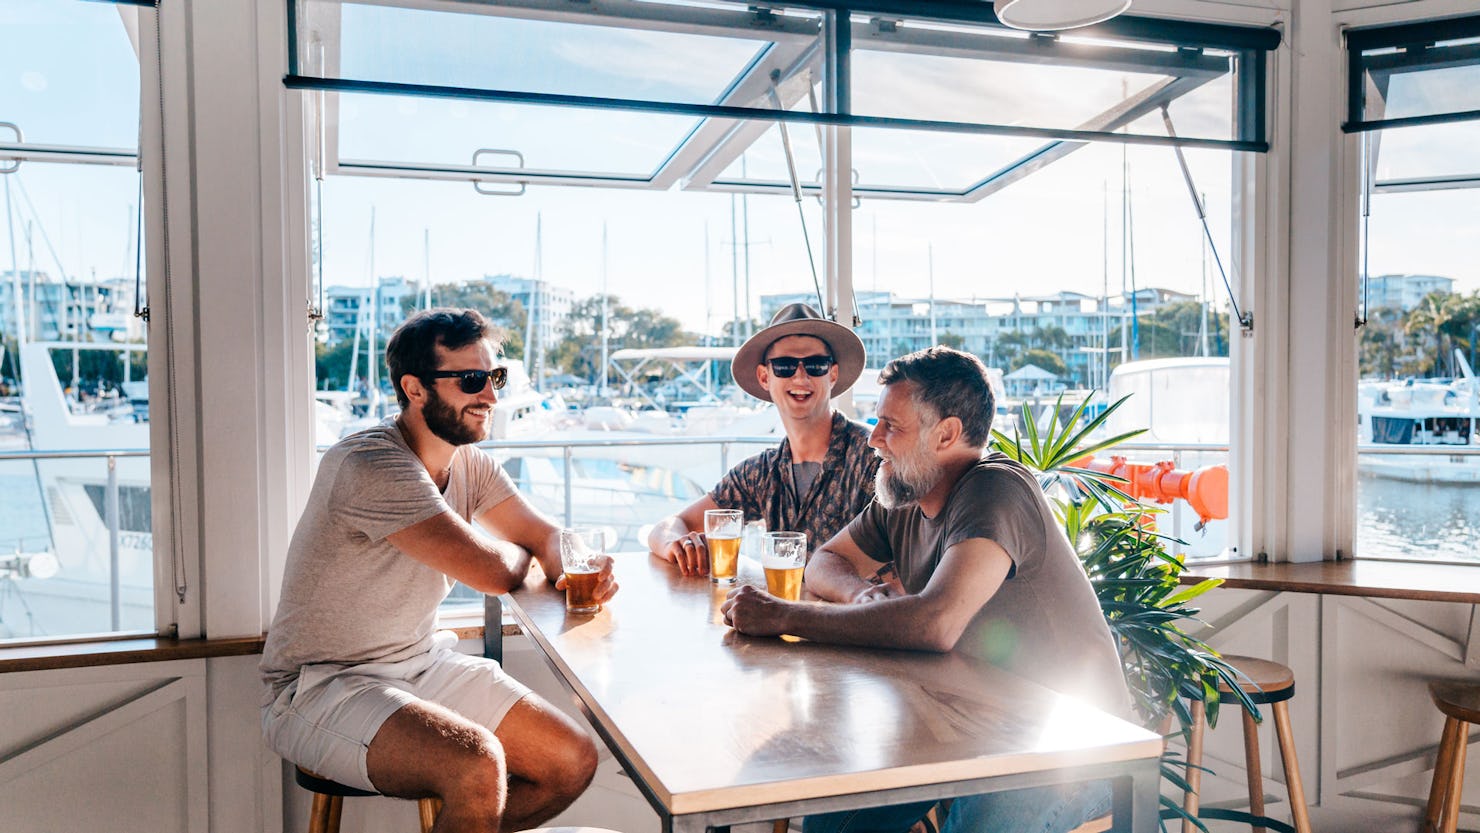 8 absolute best restaurants and bars in Caloundra and Kawana